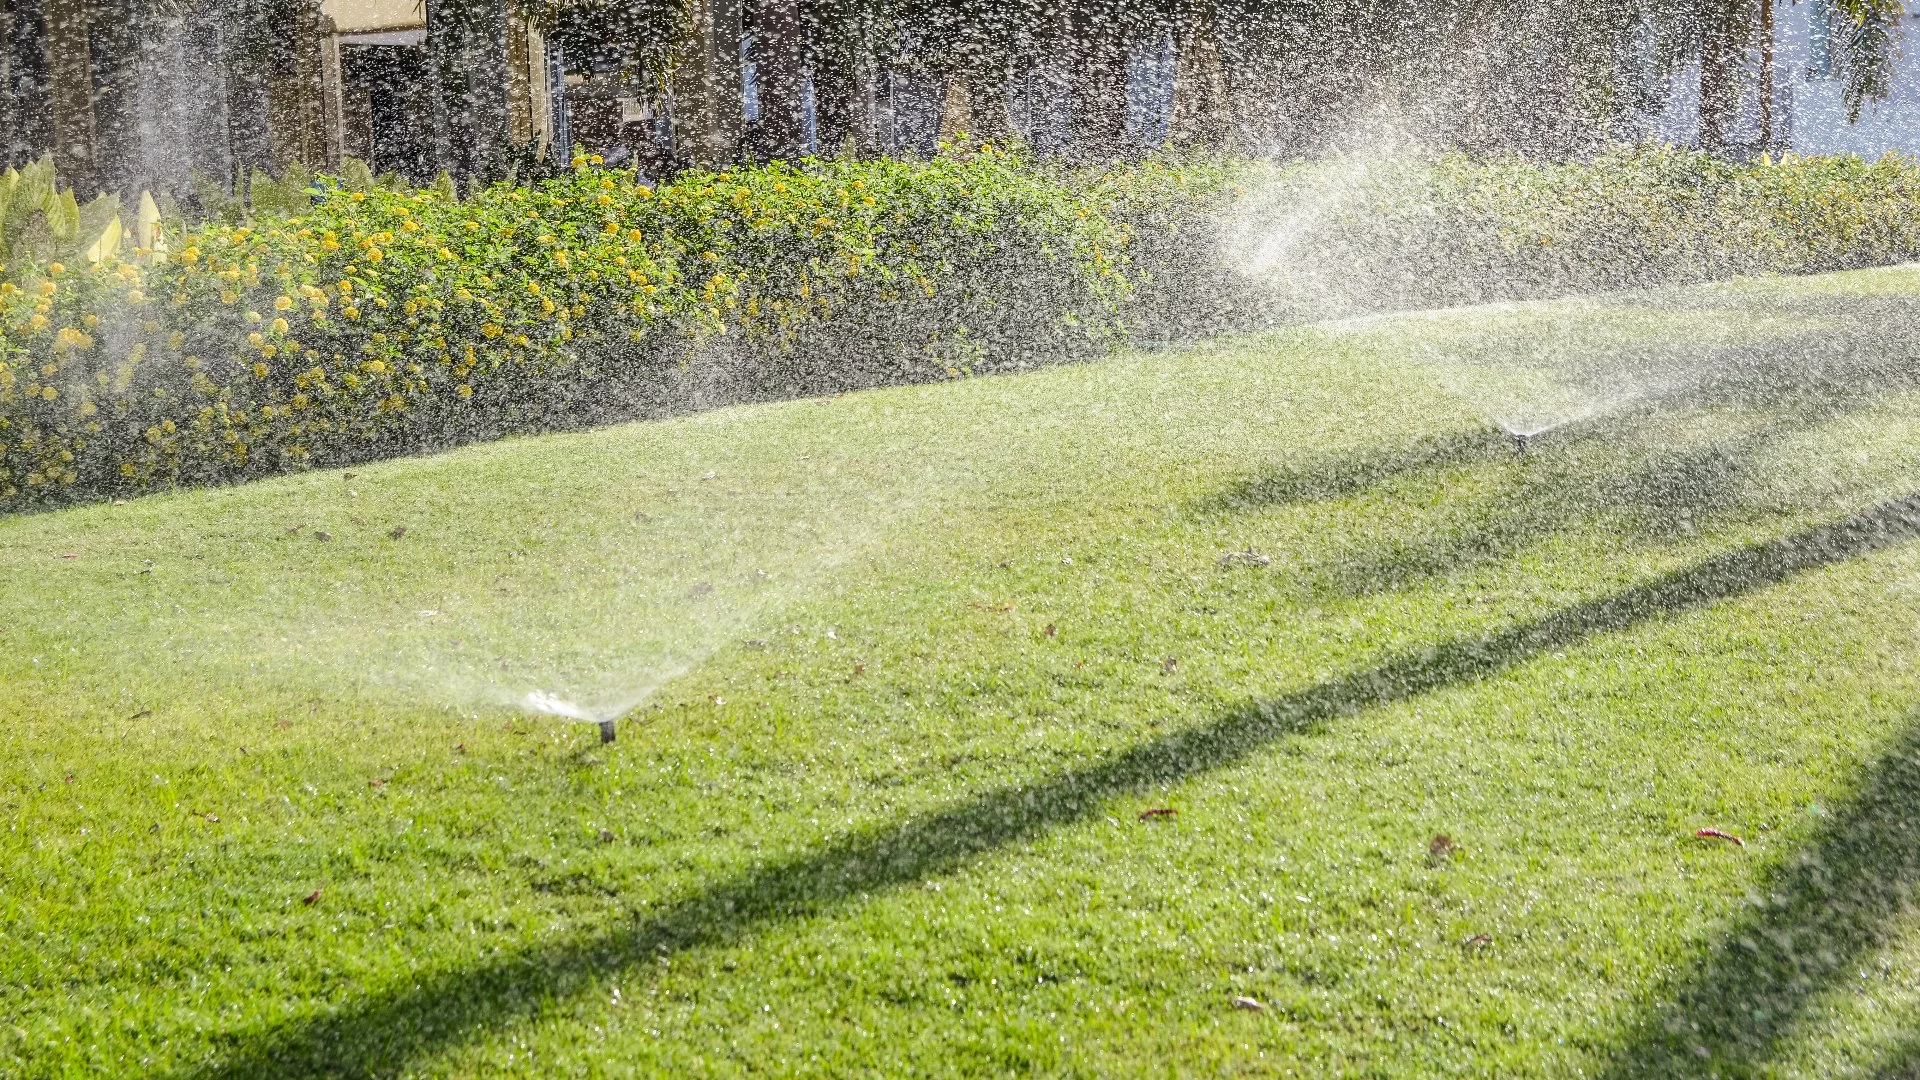 Should I Install a Sprinkler or Drip Irrigation System on My Property?